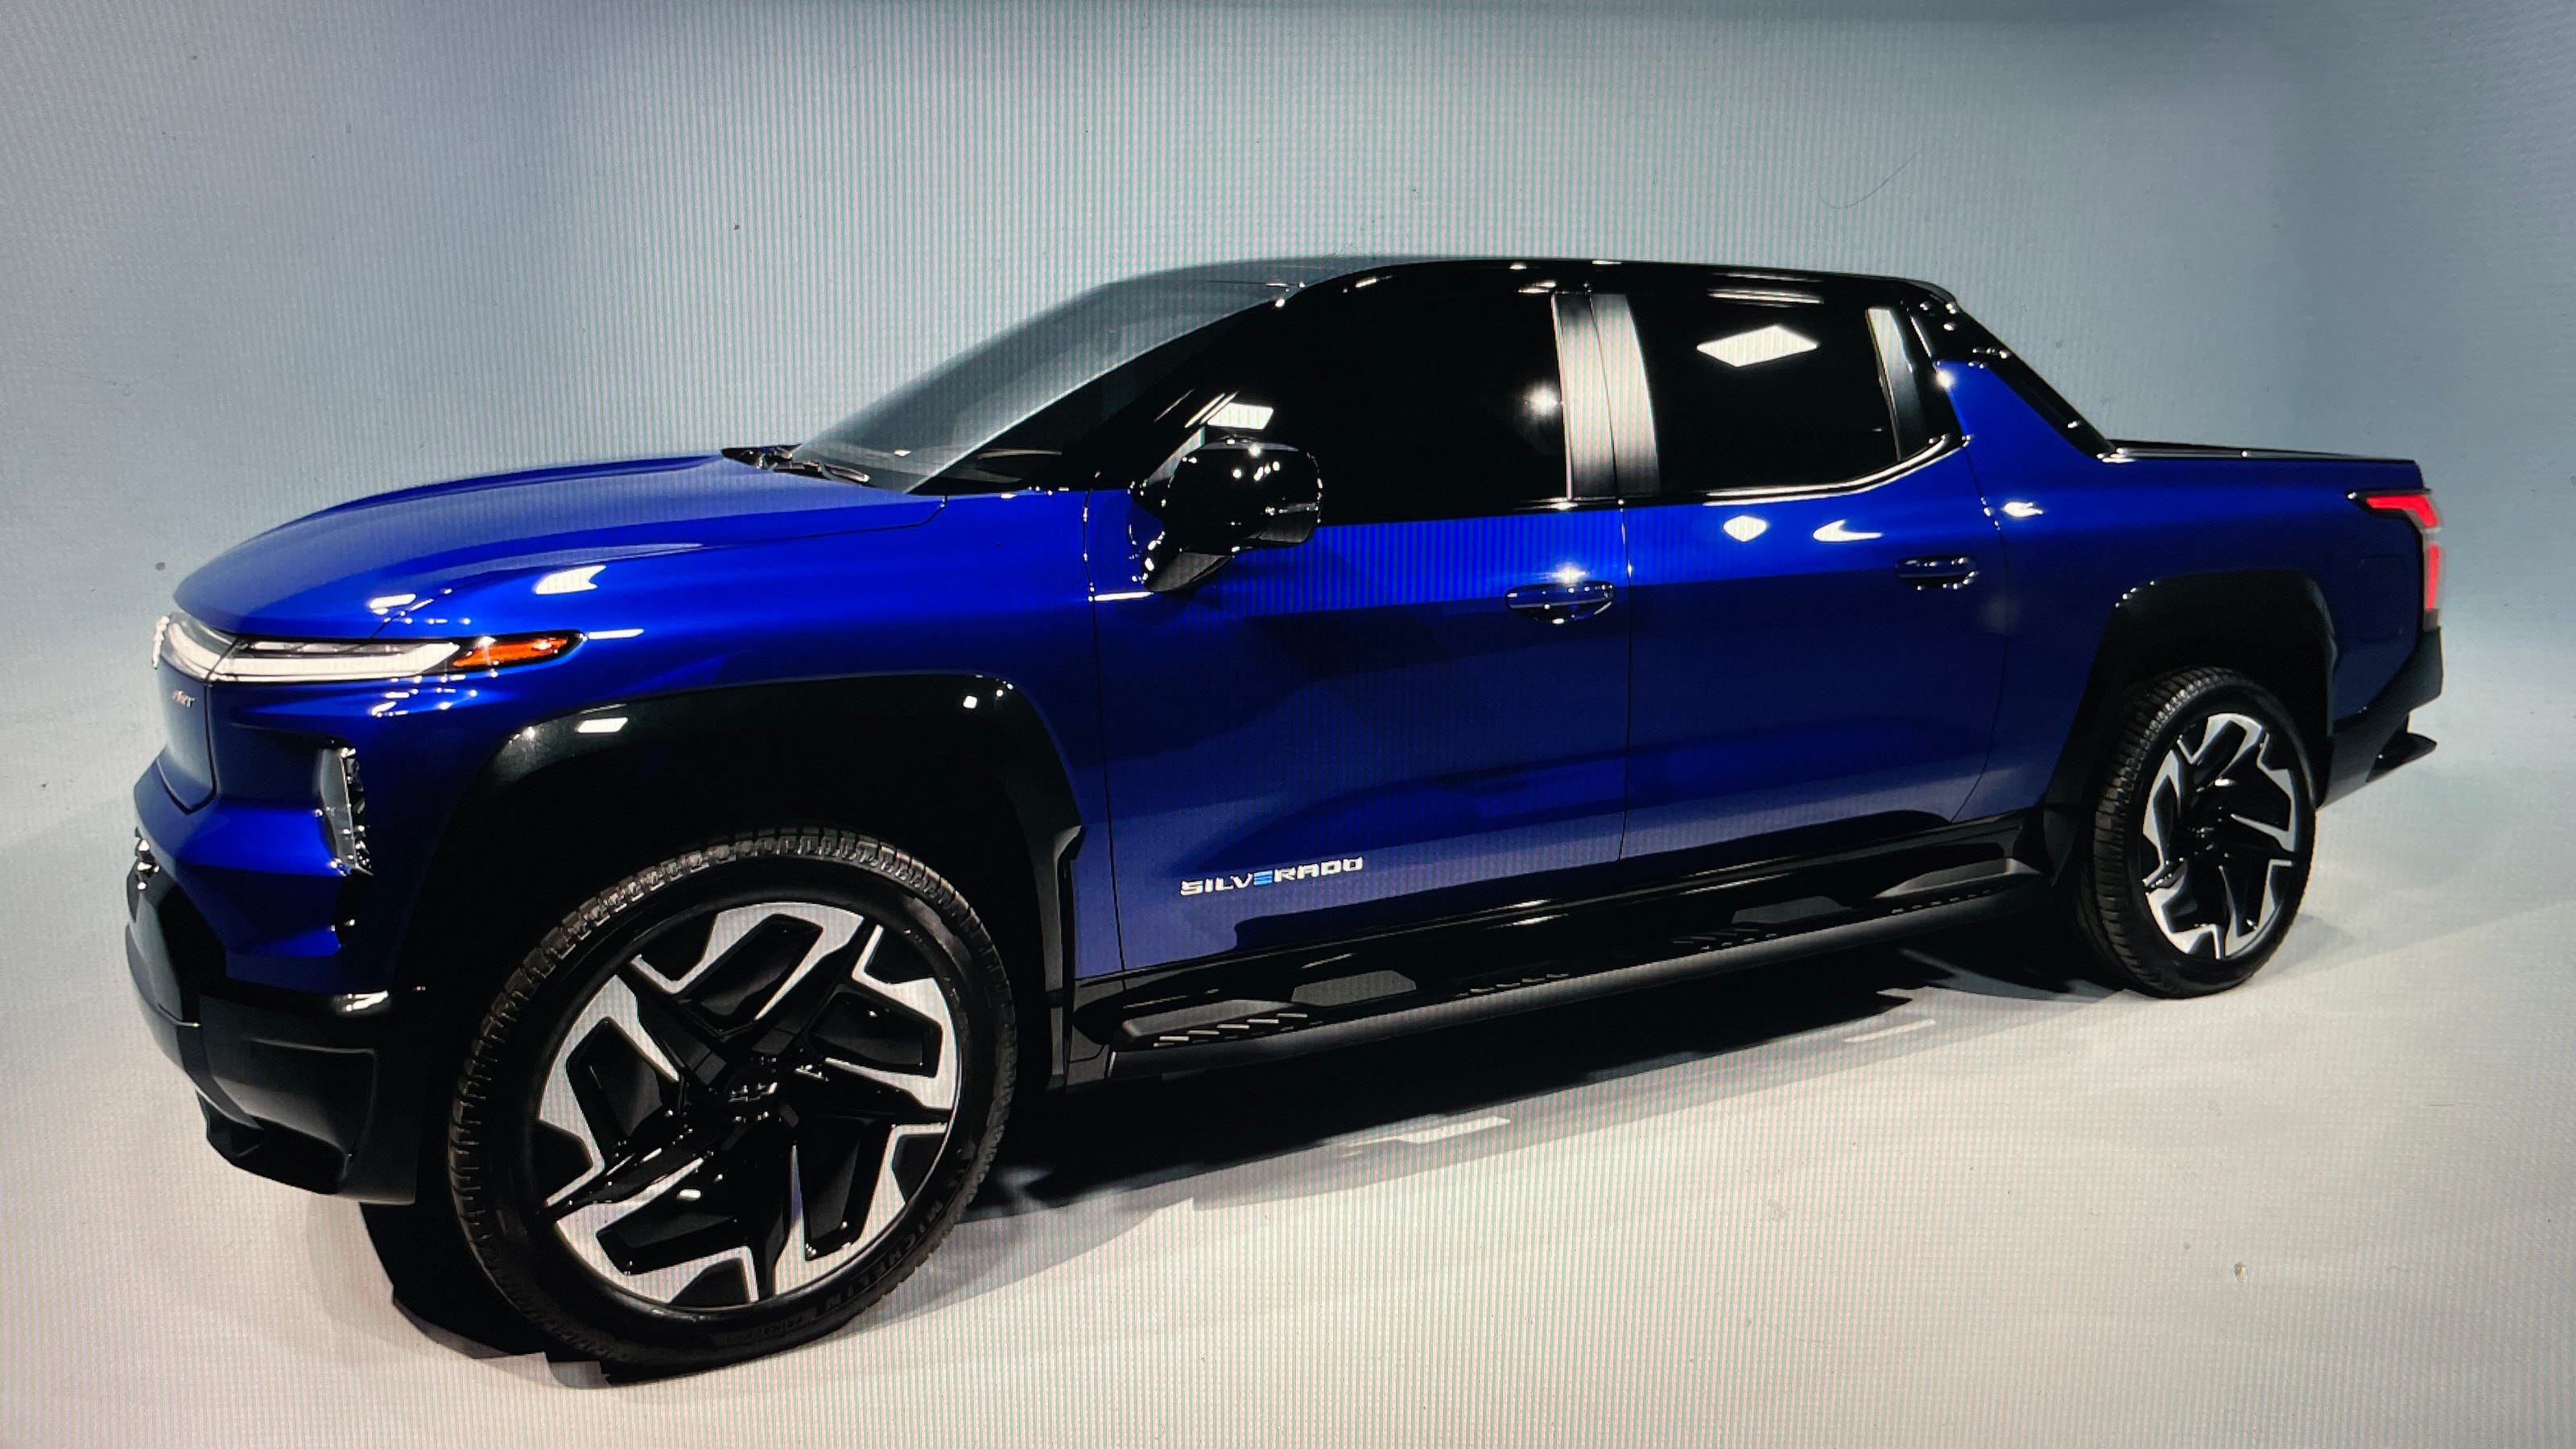 Chevrolet Silverado: Electric pickup unveiled during CES 2022